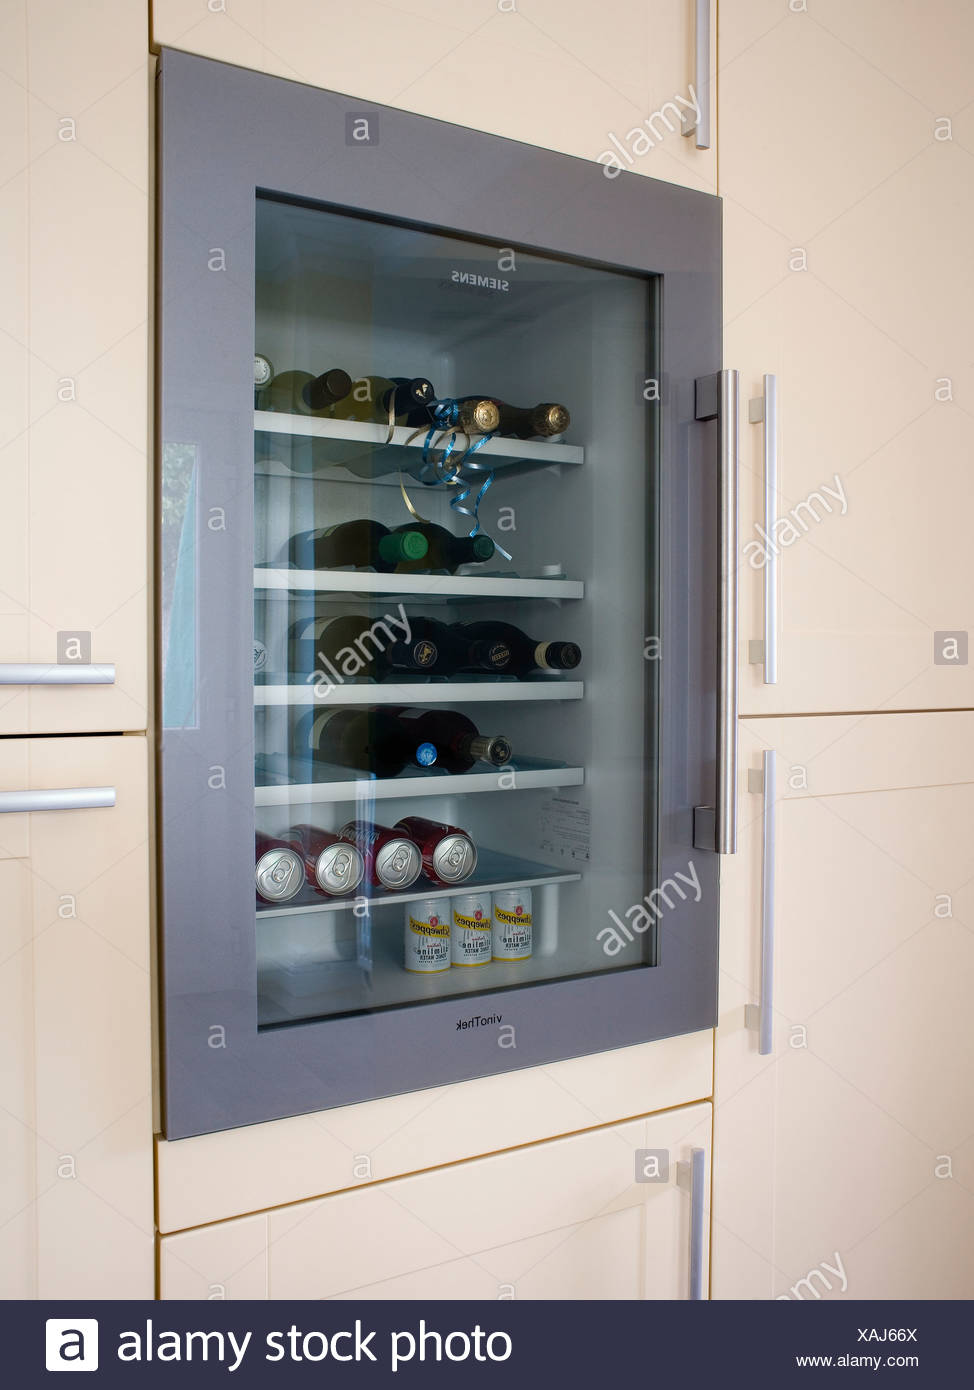 Close Up Of Refrigerated Drinks Cooler In Fitted Kitchen Cupboard